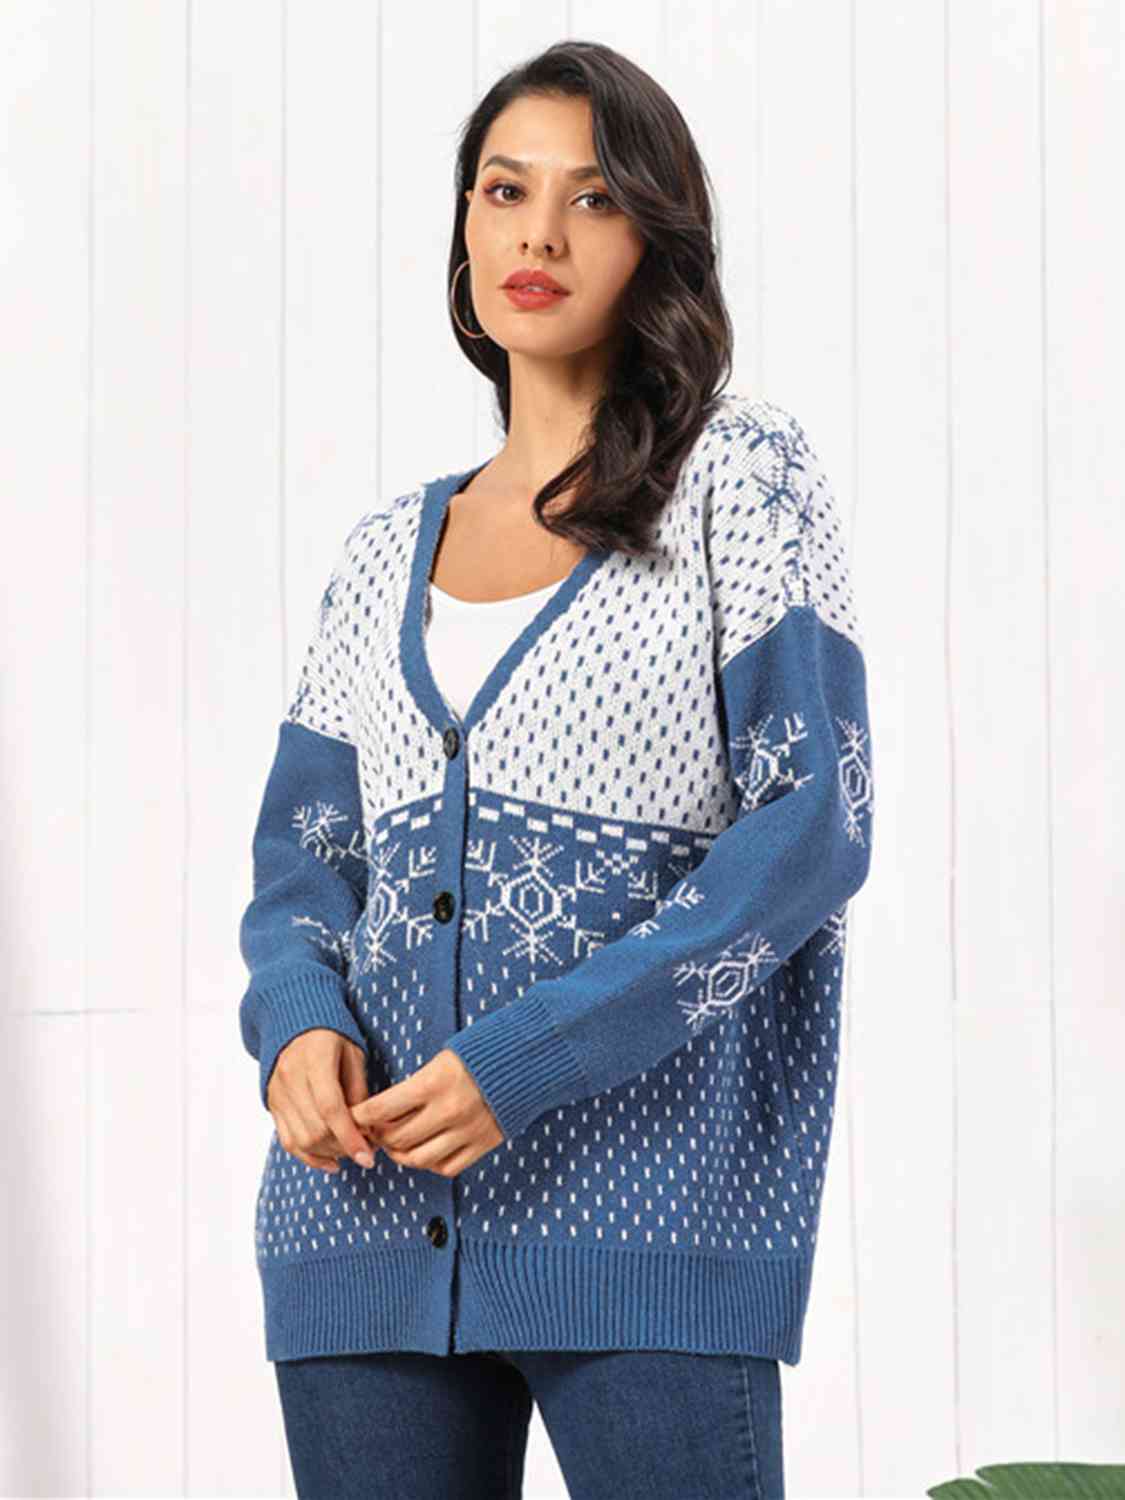 Snowflake Button Down Cardigan - Women’s Clothing & Accessories - Shirts & Tops - 7 - 2024